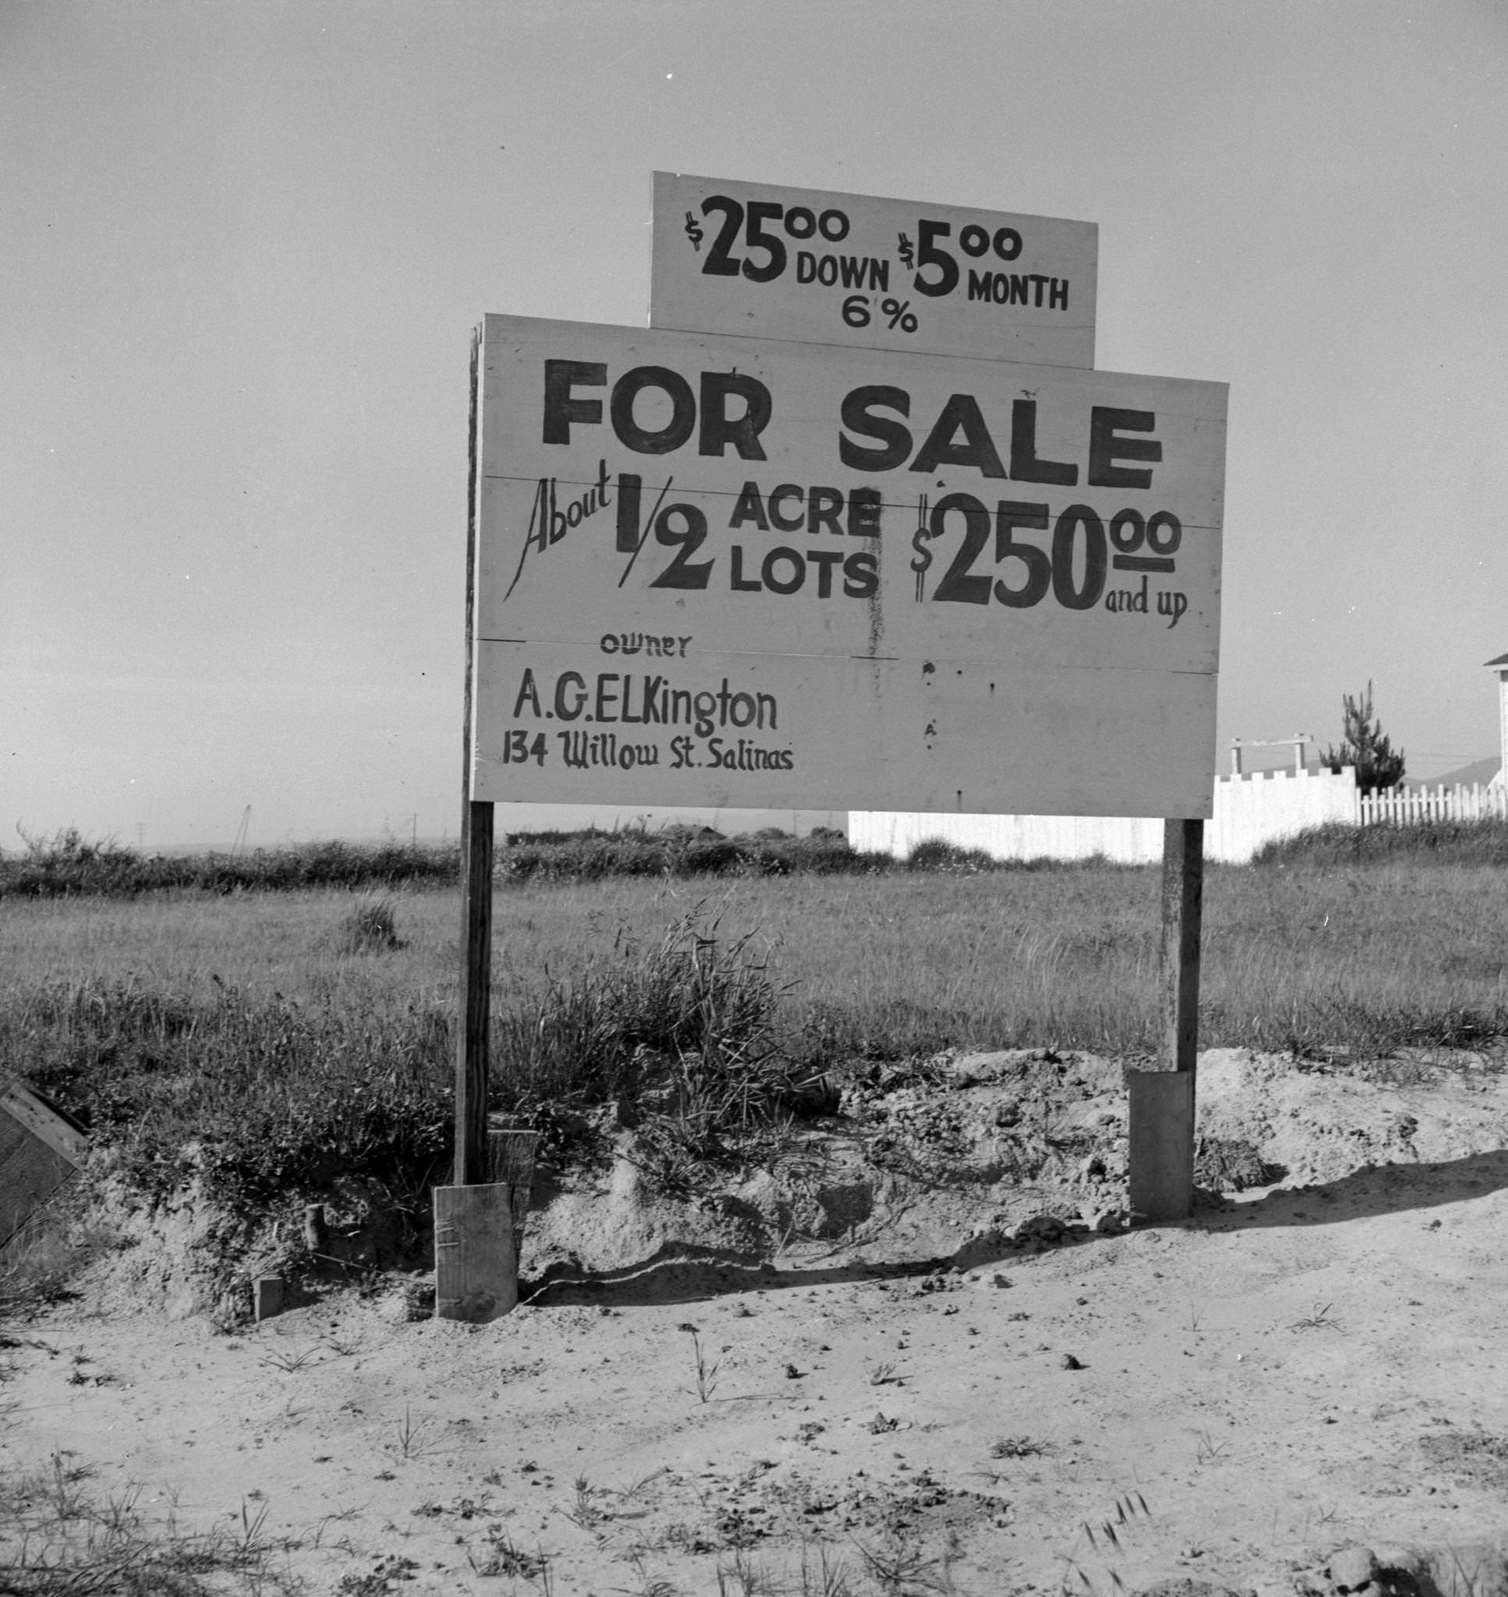 Housing for lettuce workers on edge of town, 1938